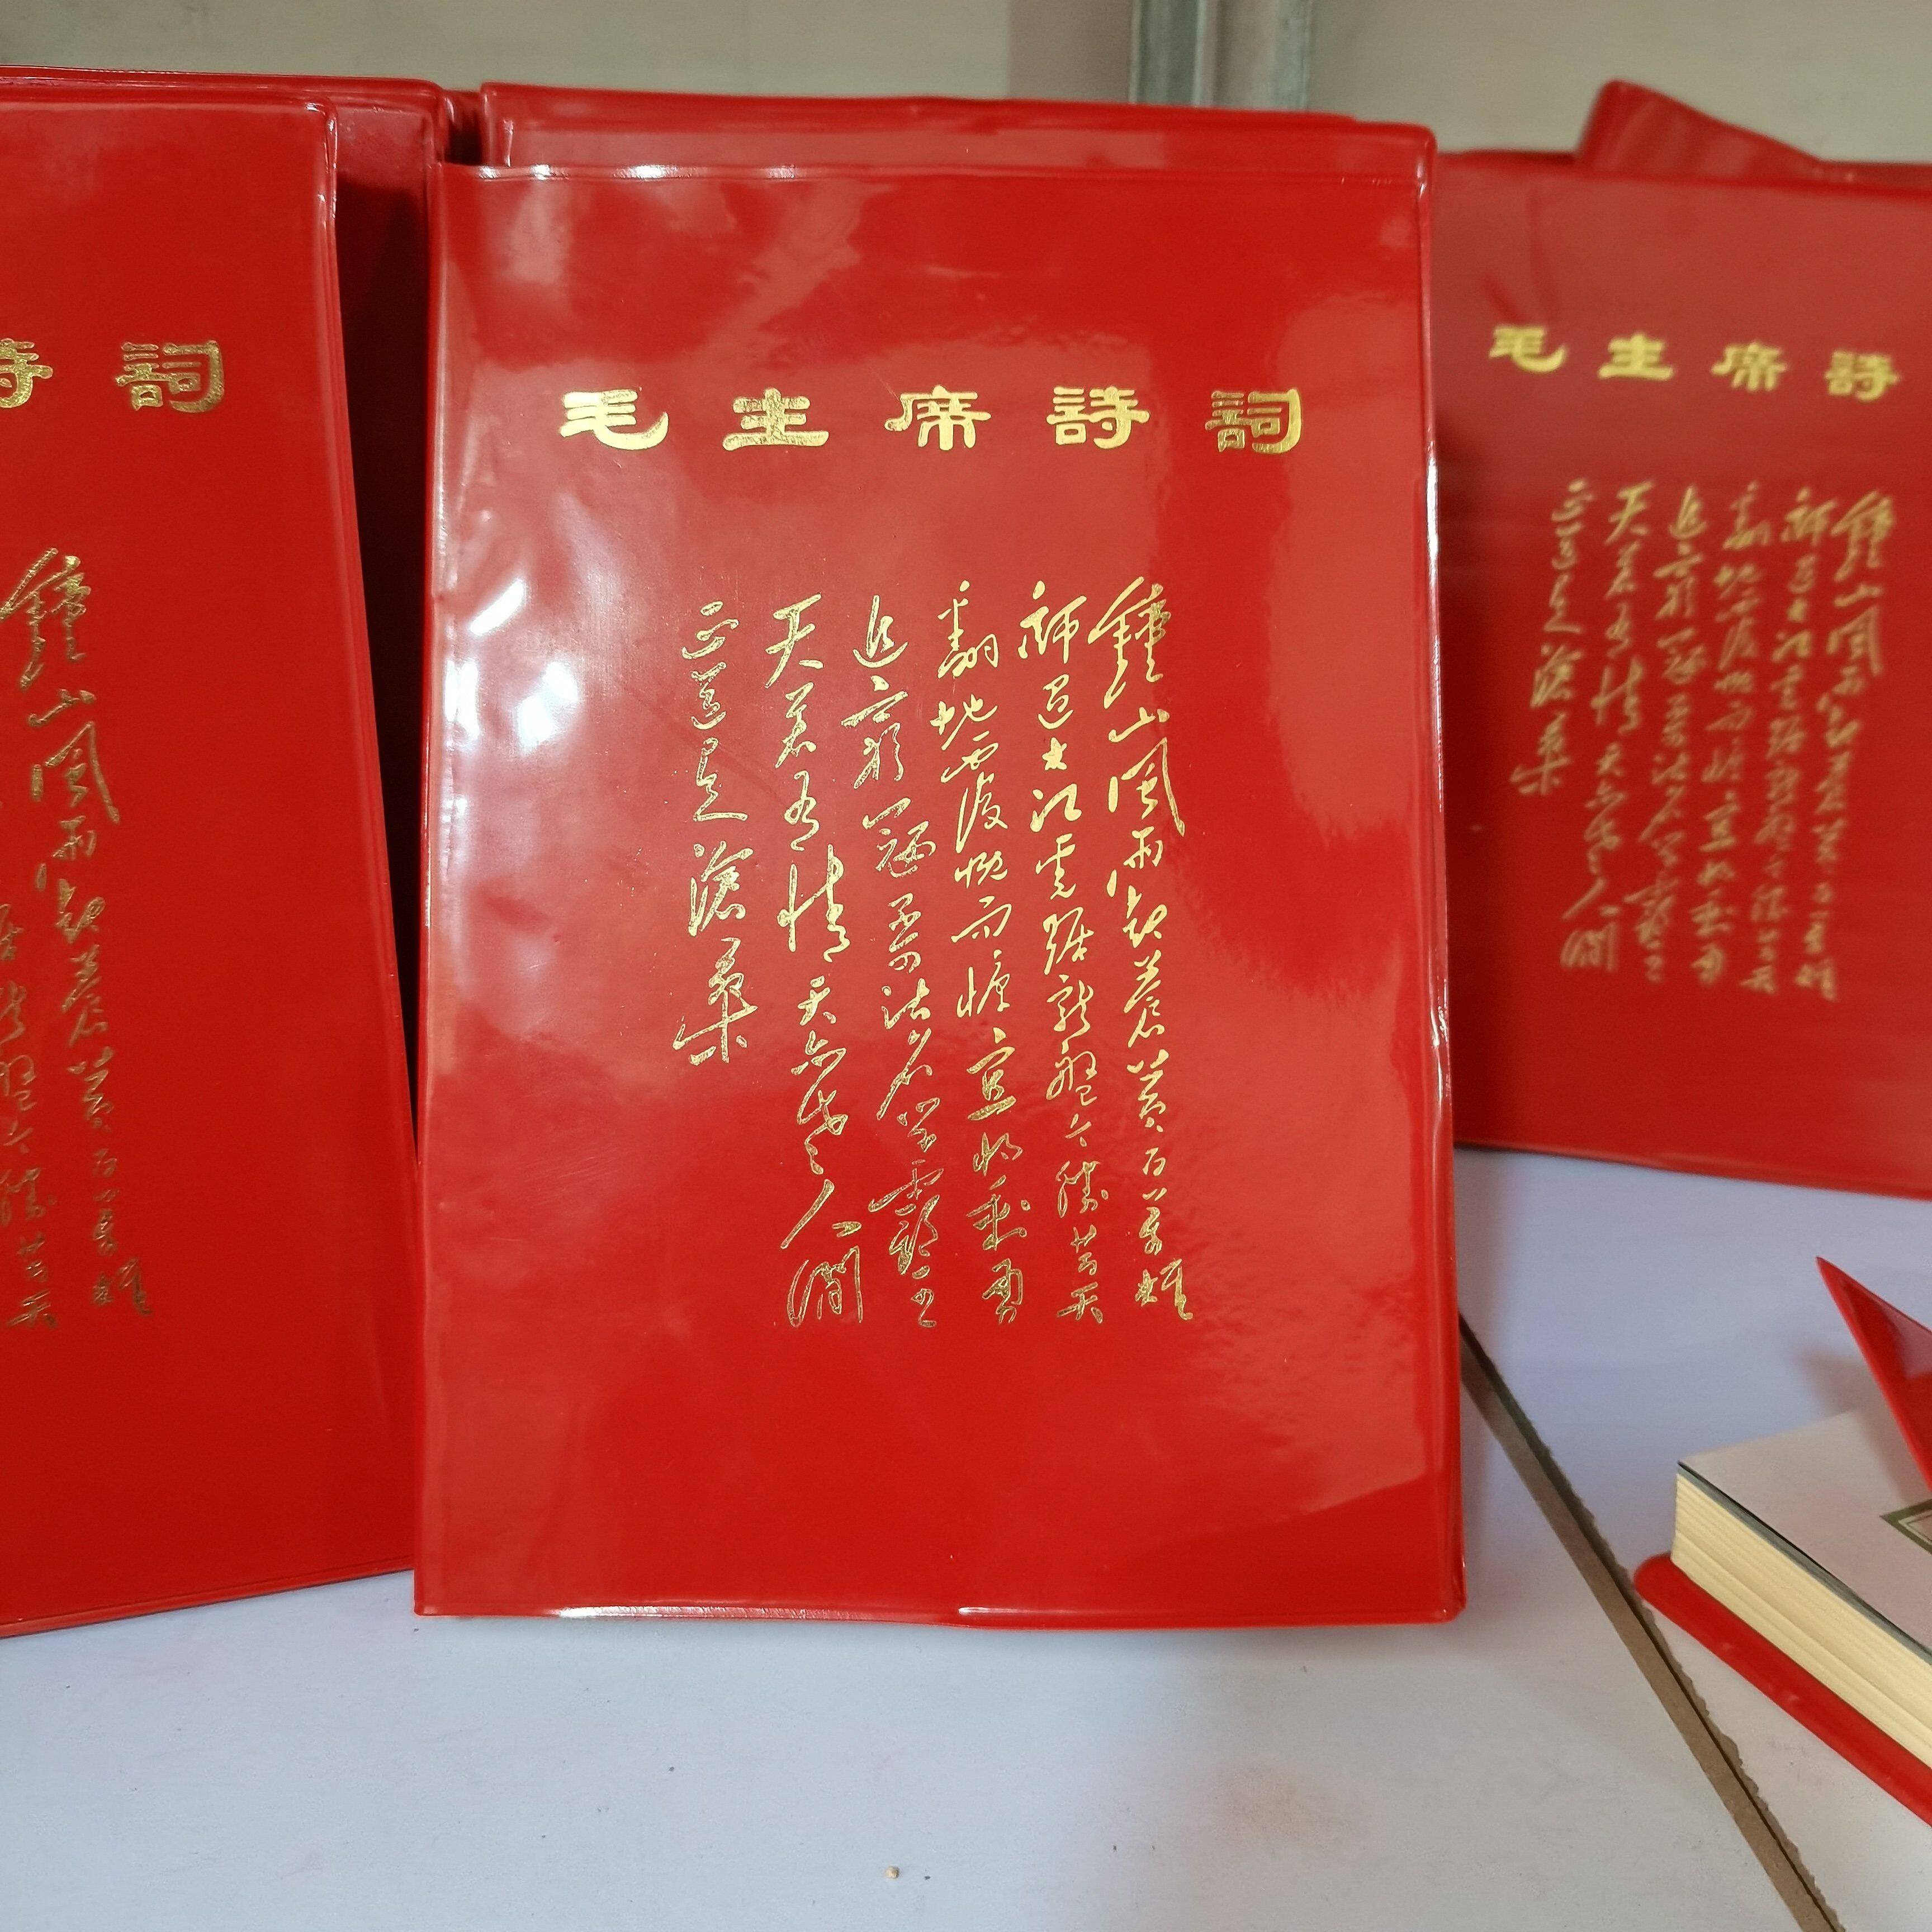 Selected poems of Chairman Mao s quotations Chinese version of Red